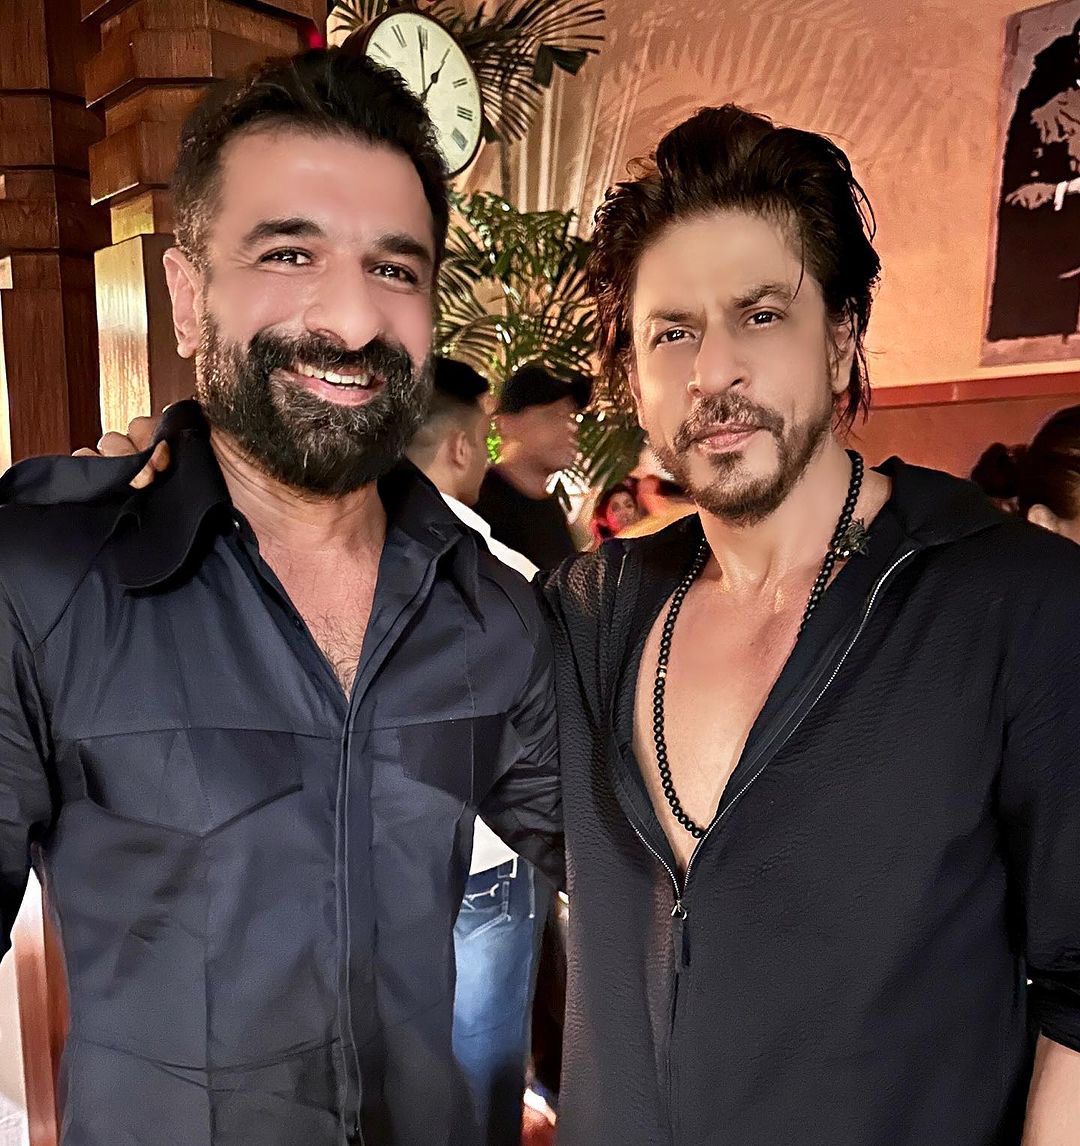 Working With Shah Rukh Khan Is A Dream Come True Moment, Says Eijaz Khan! From Major TV Shows To Bollywood Movies, Jawan Actor Reveals How Things Get Changed In Life.